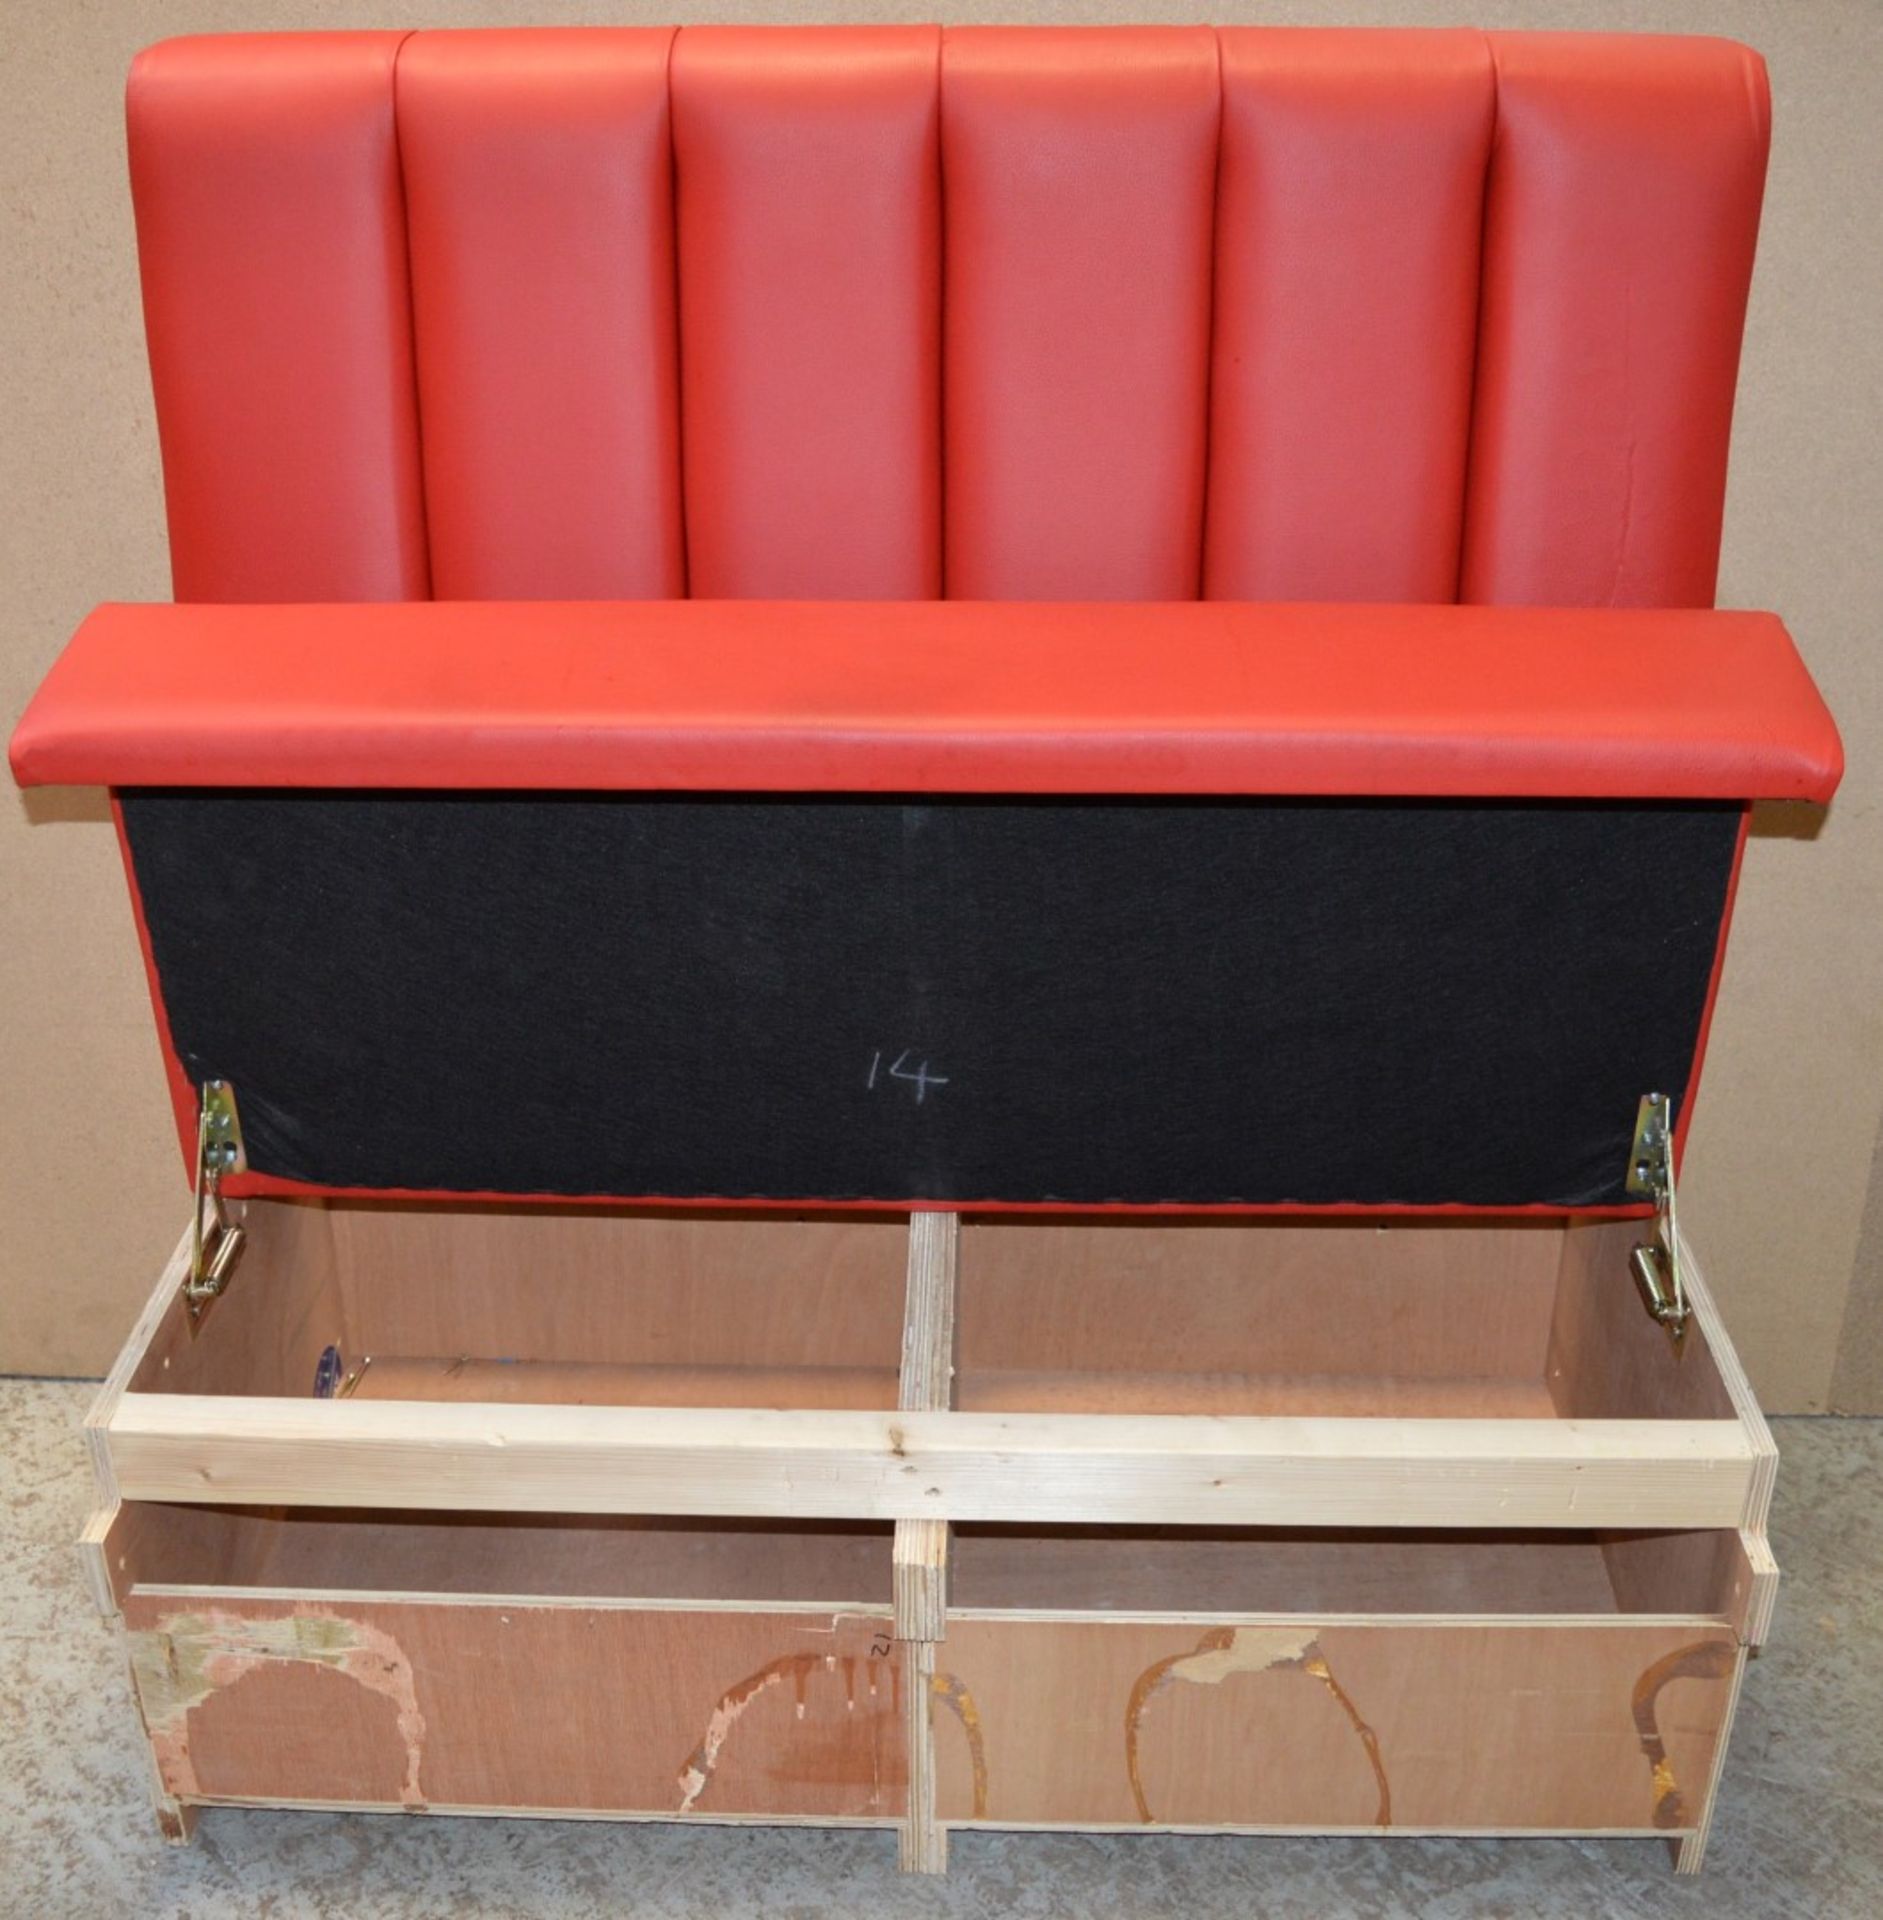 1 x High Back Single Seating Bench Upholstered in Red Leather - Sits upto Two People - High - Image 16 of 17